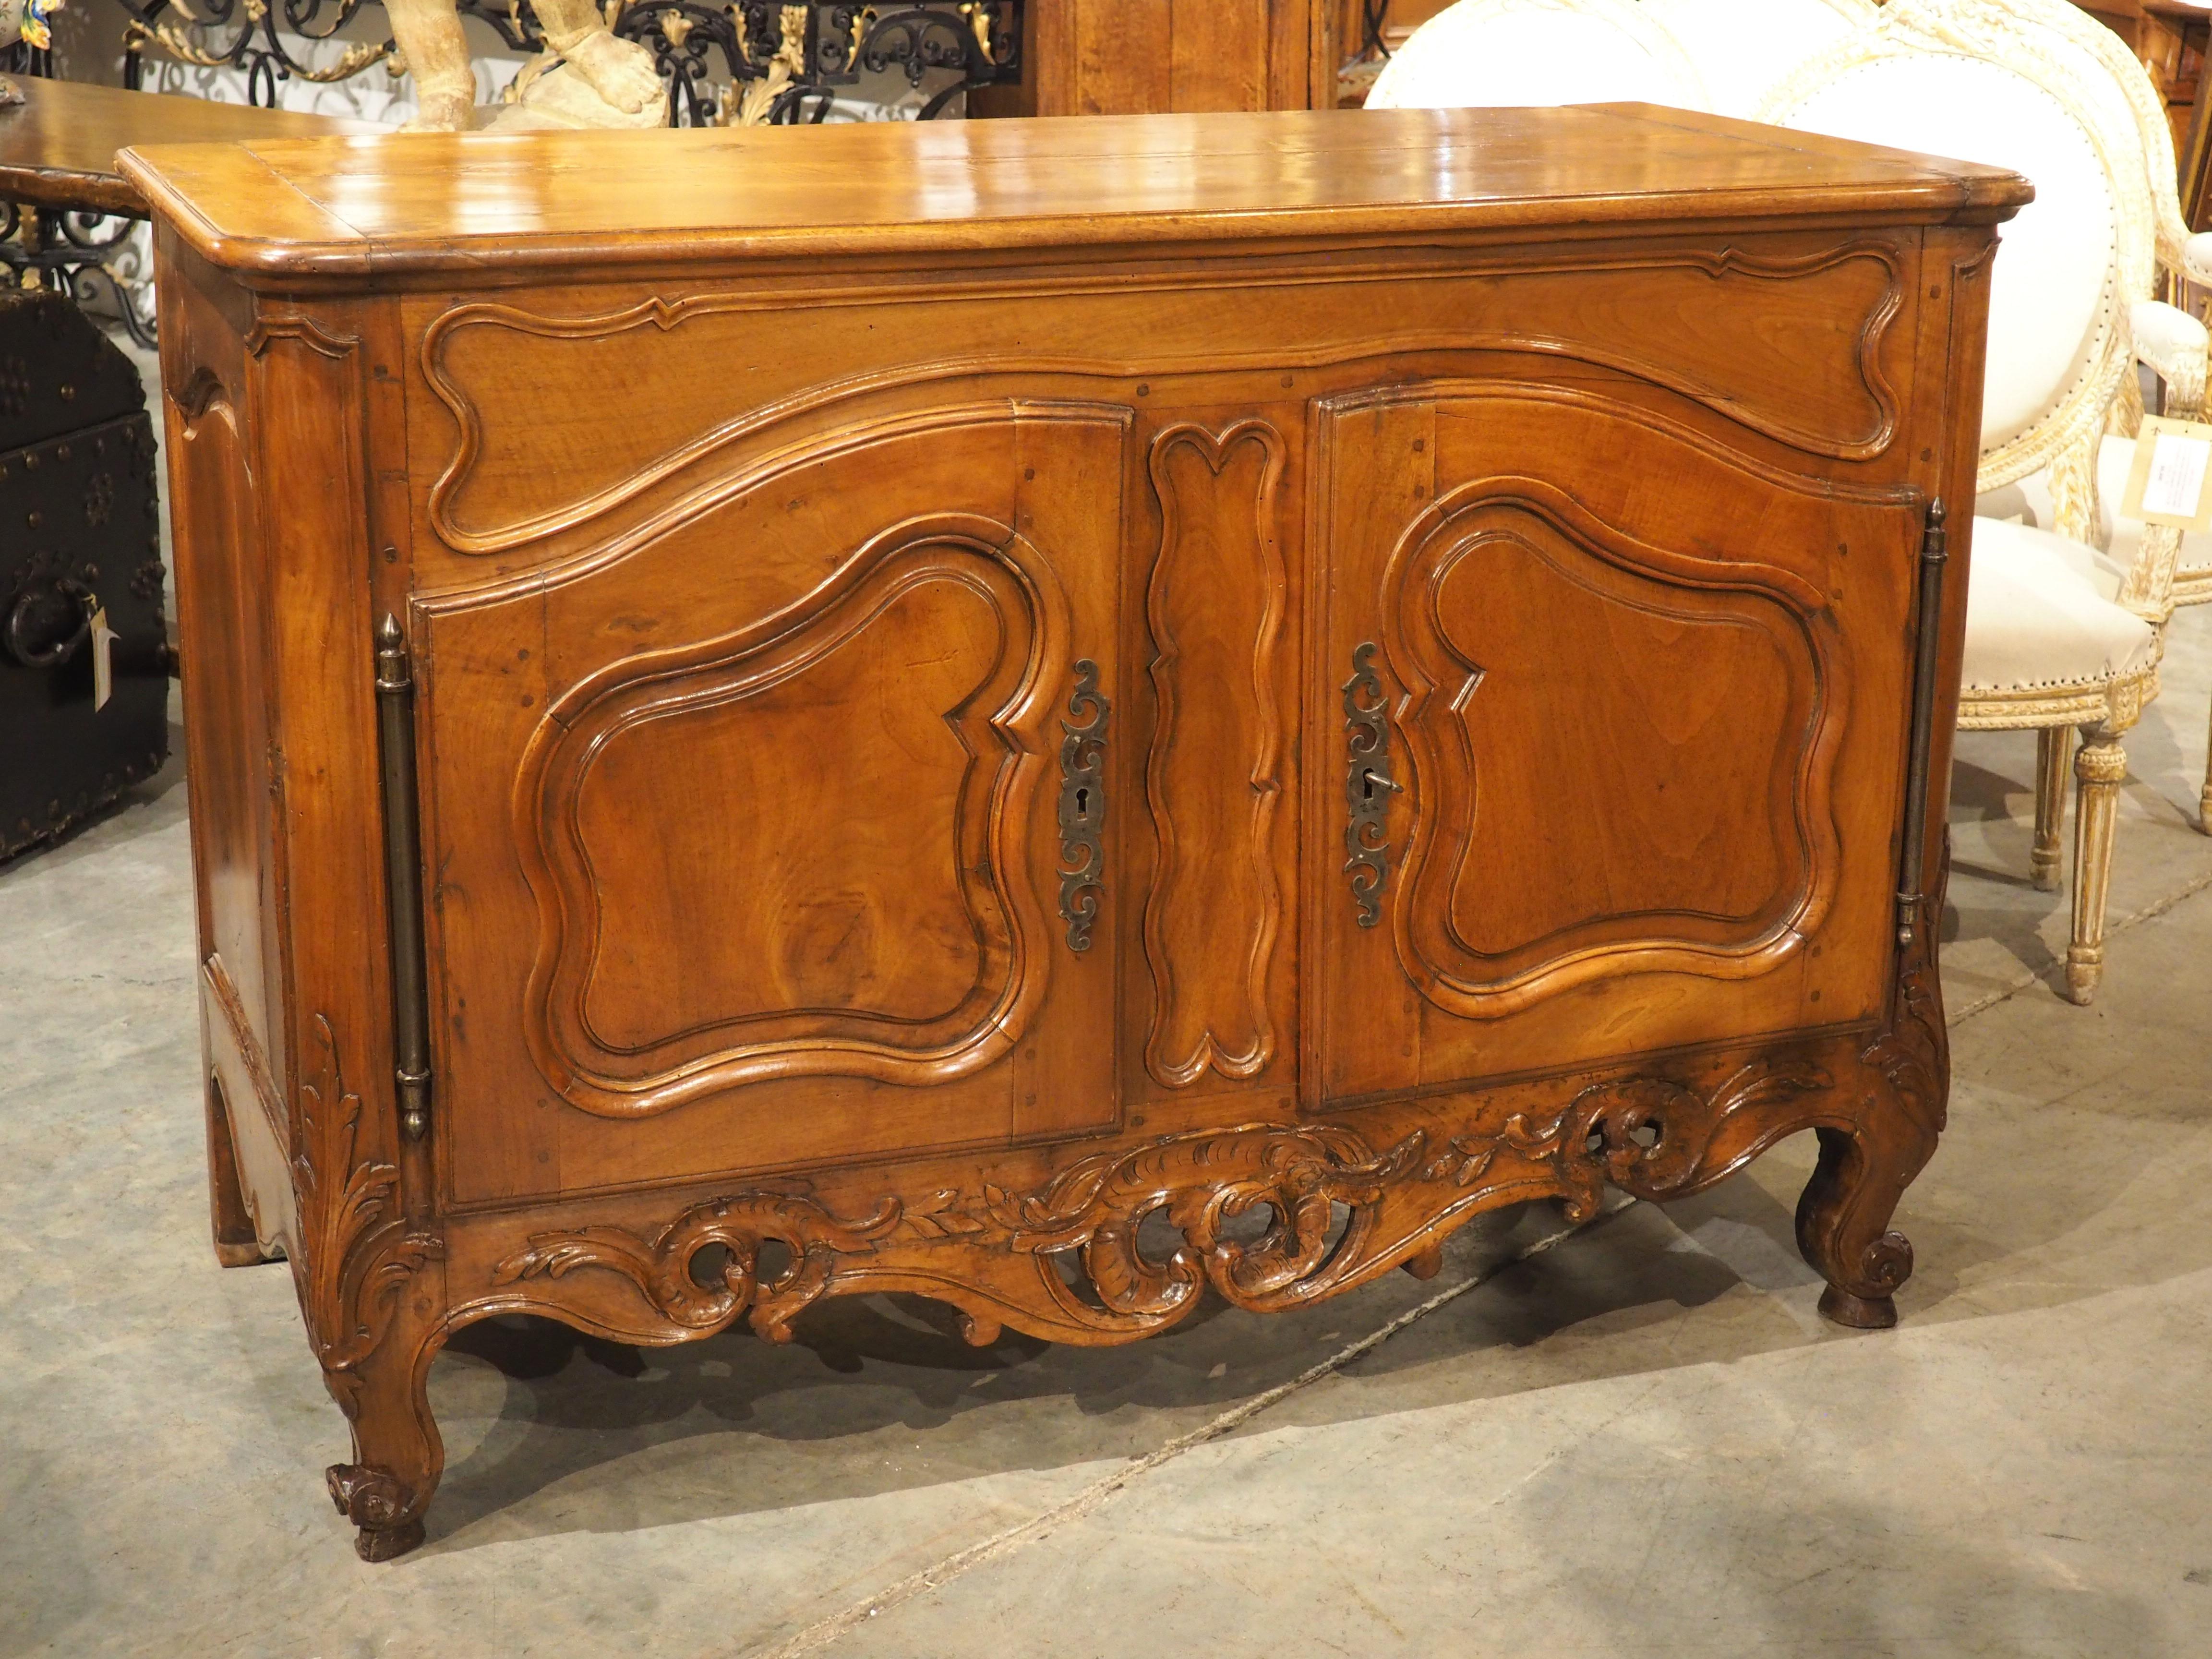 Circa 1750 Carved Walnut Wood Buffet Crédence from Nîmes, France 10